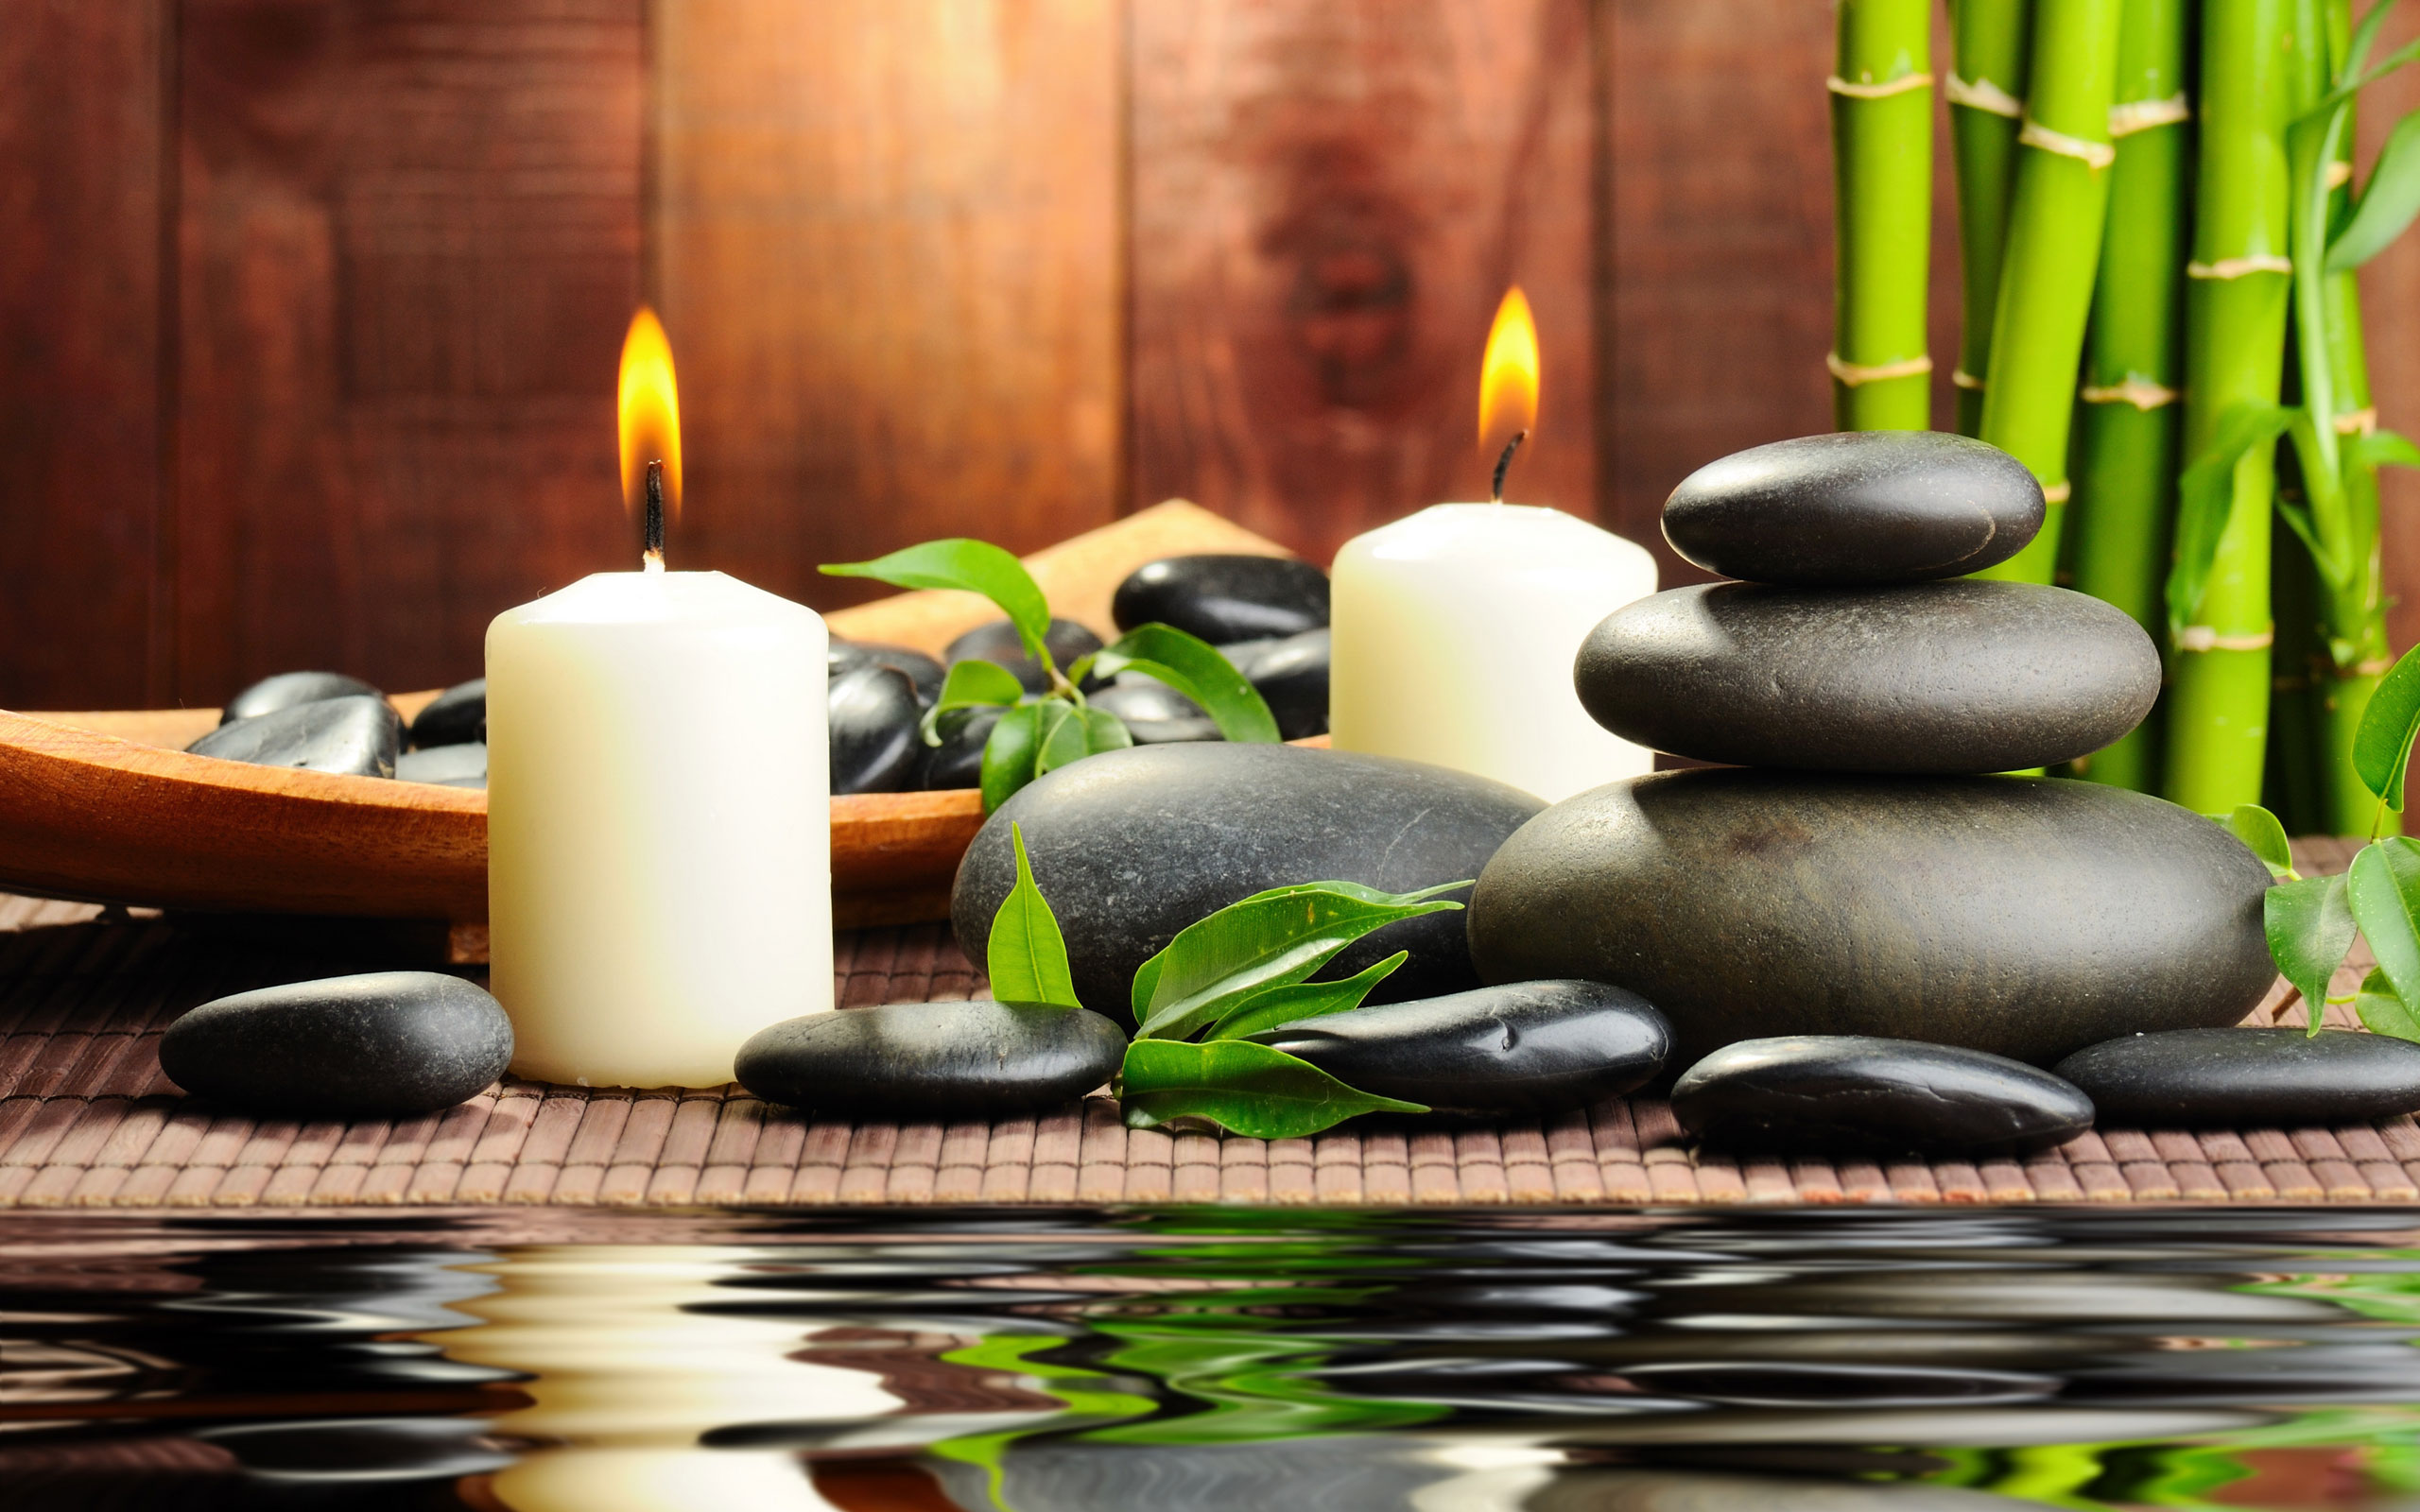 Naturopathy is a blend of five natural elements including earth, water, fire, ether and fasting